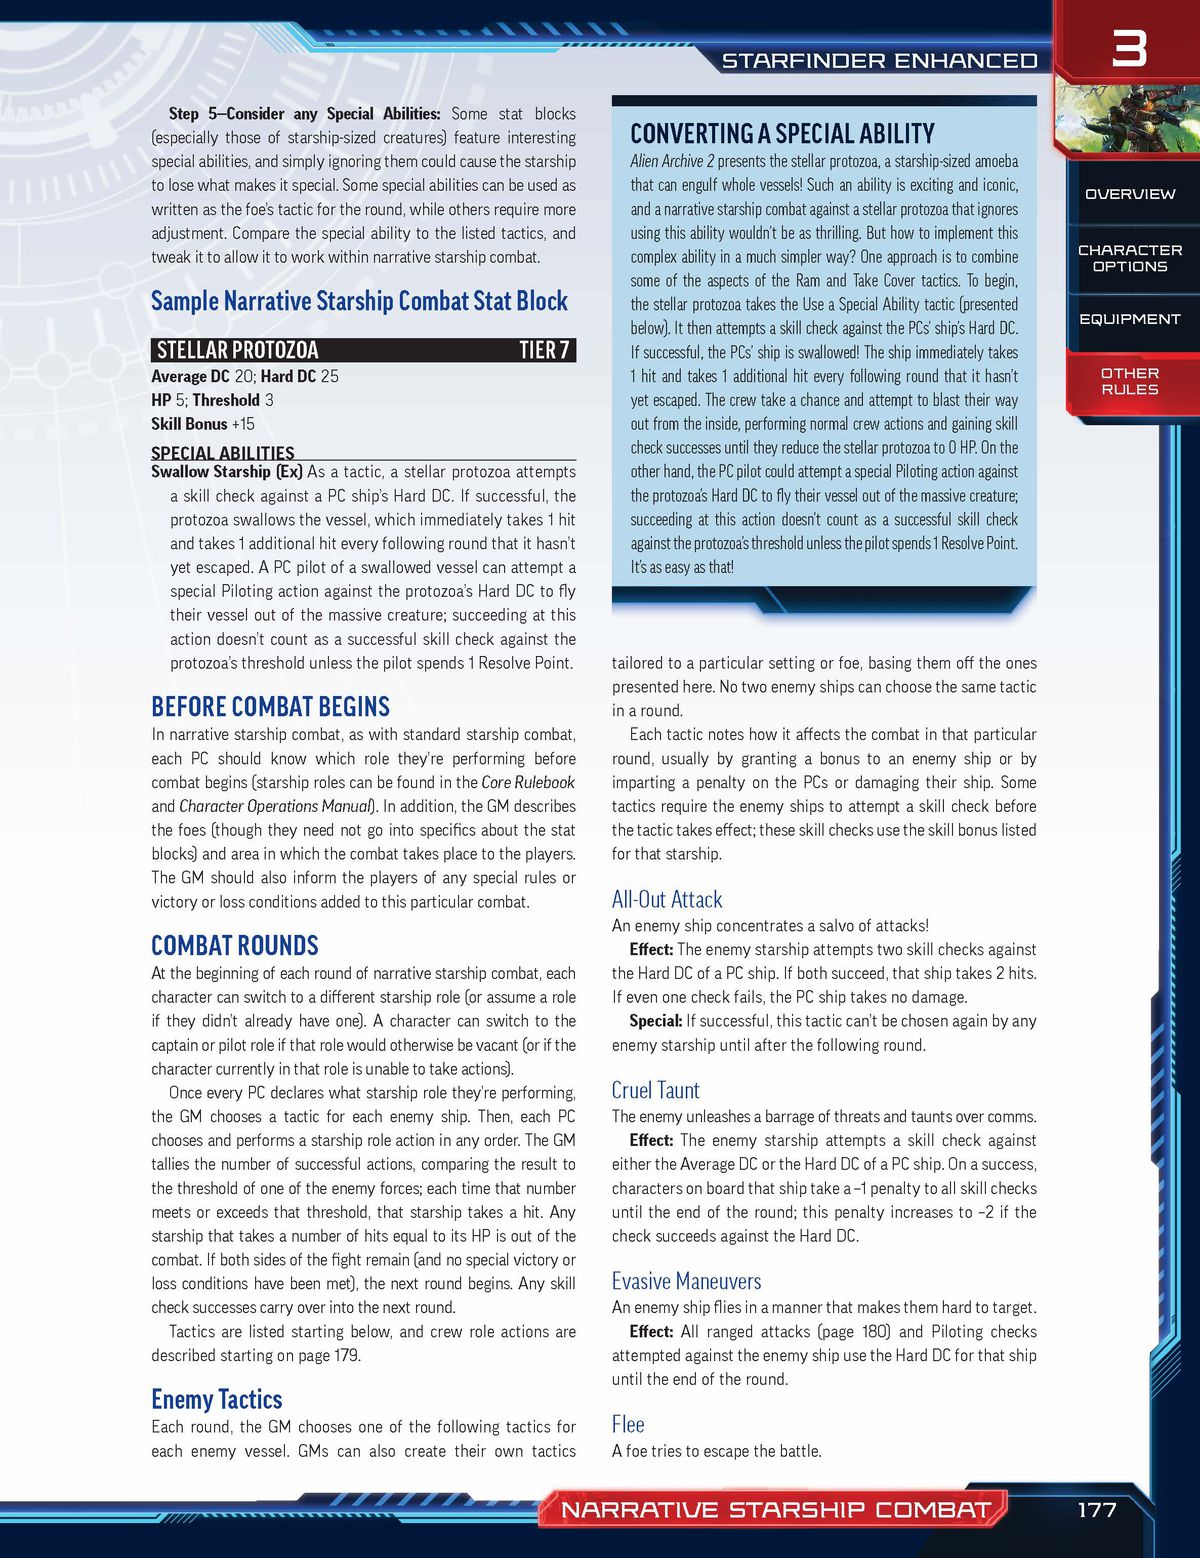 The second page on Narrative Starship Combat from Starfinder enhanced. It includes rules for converting special abilities.